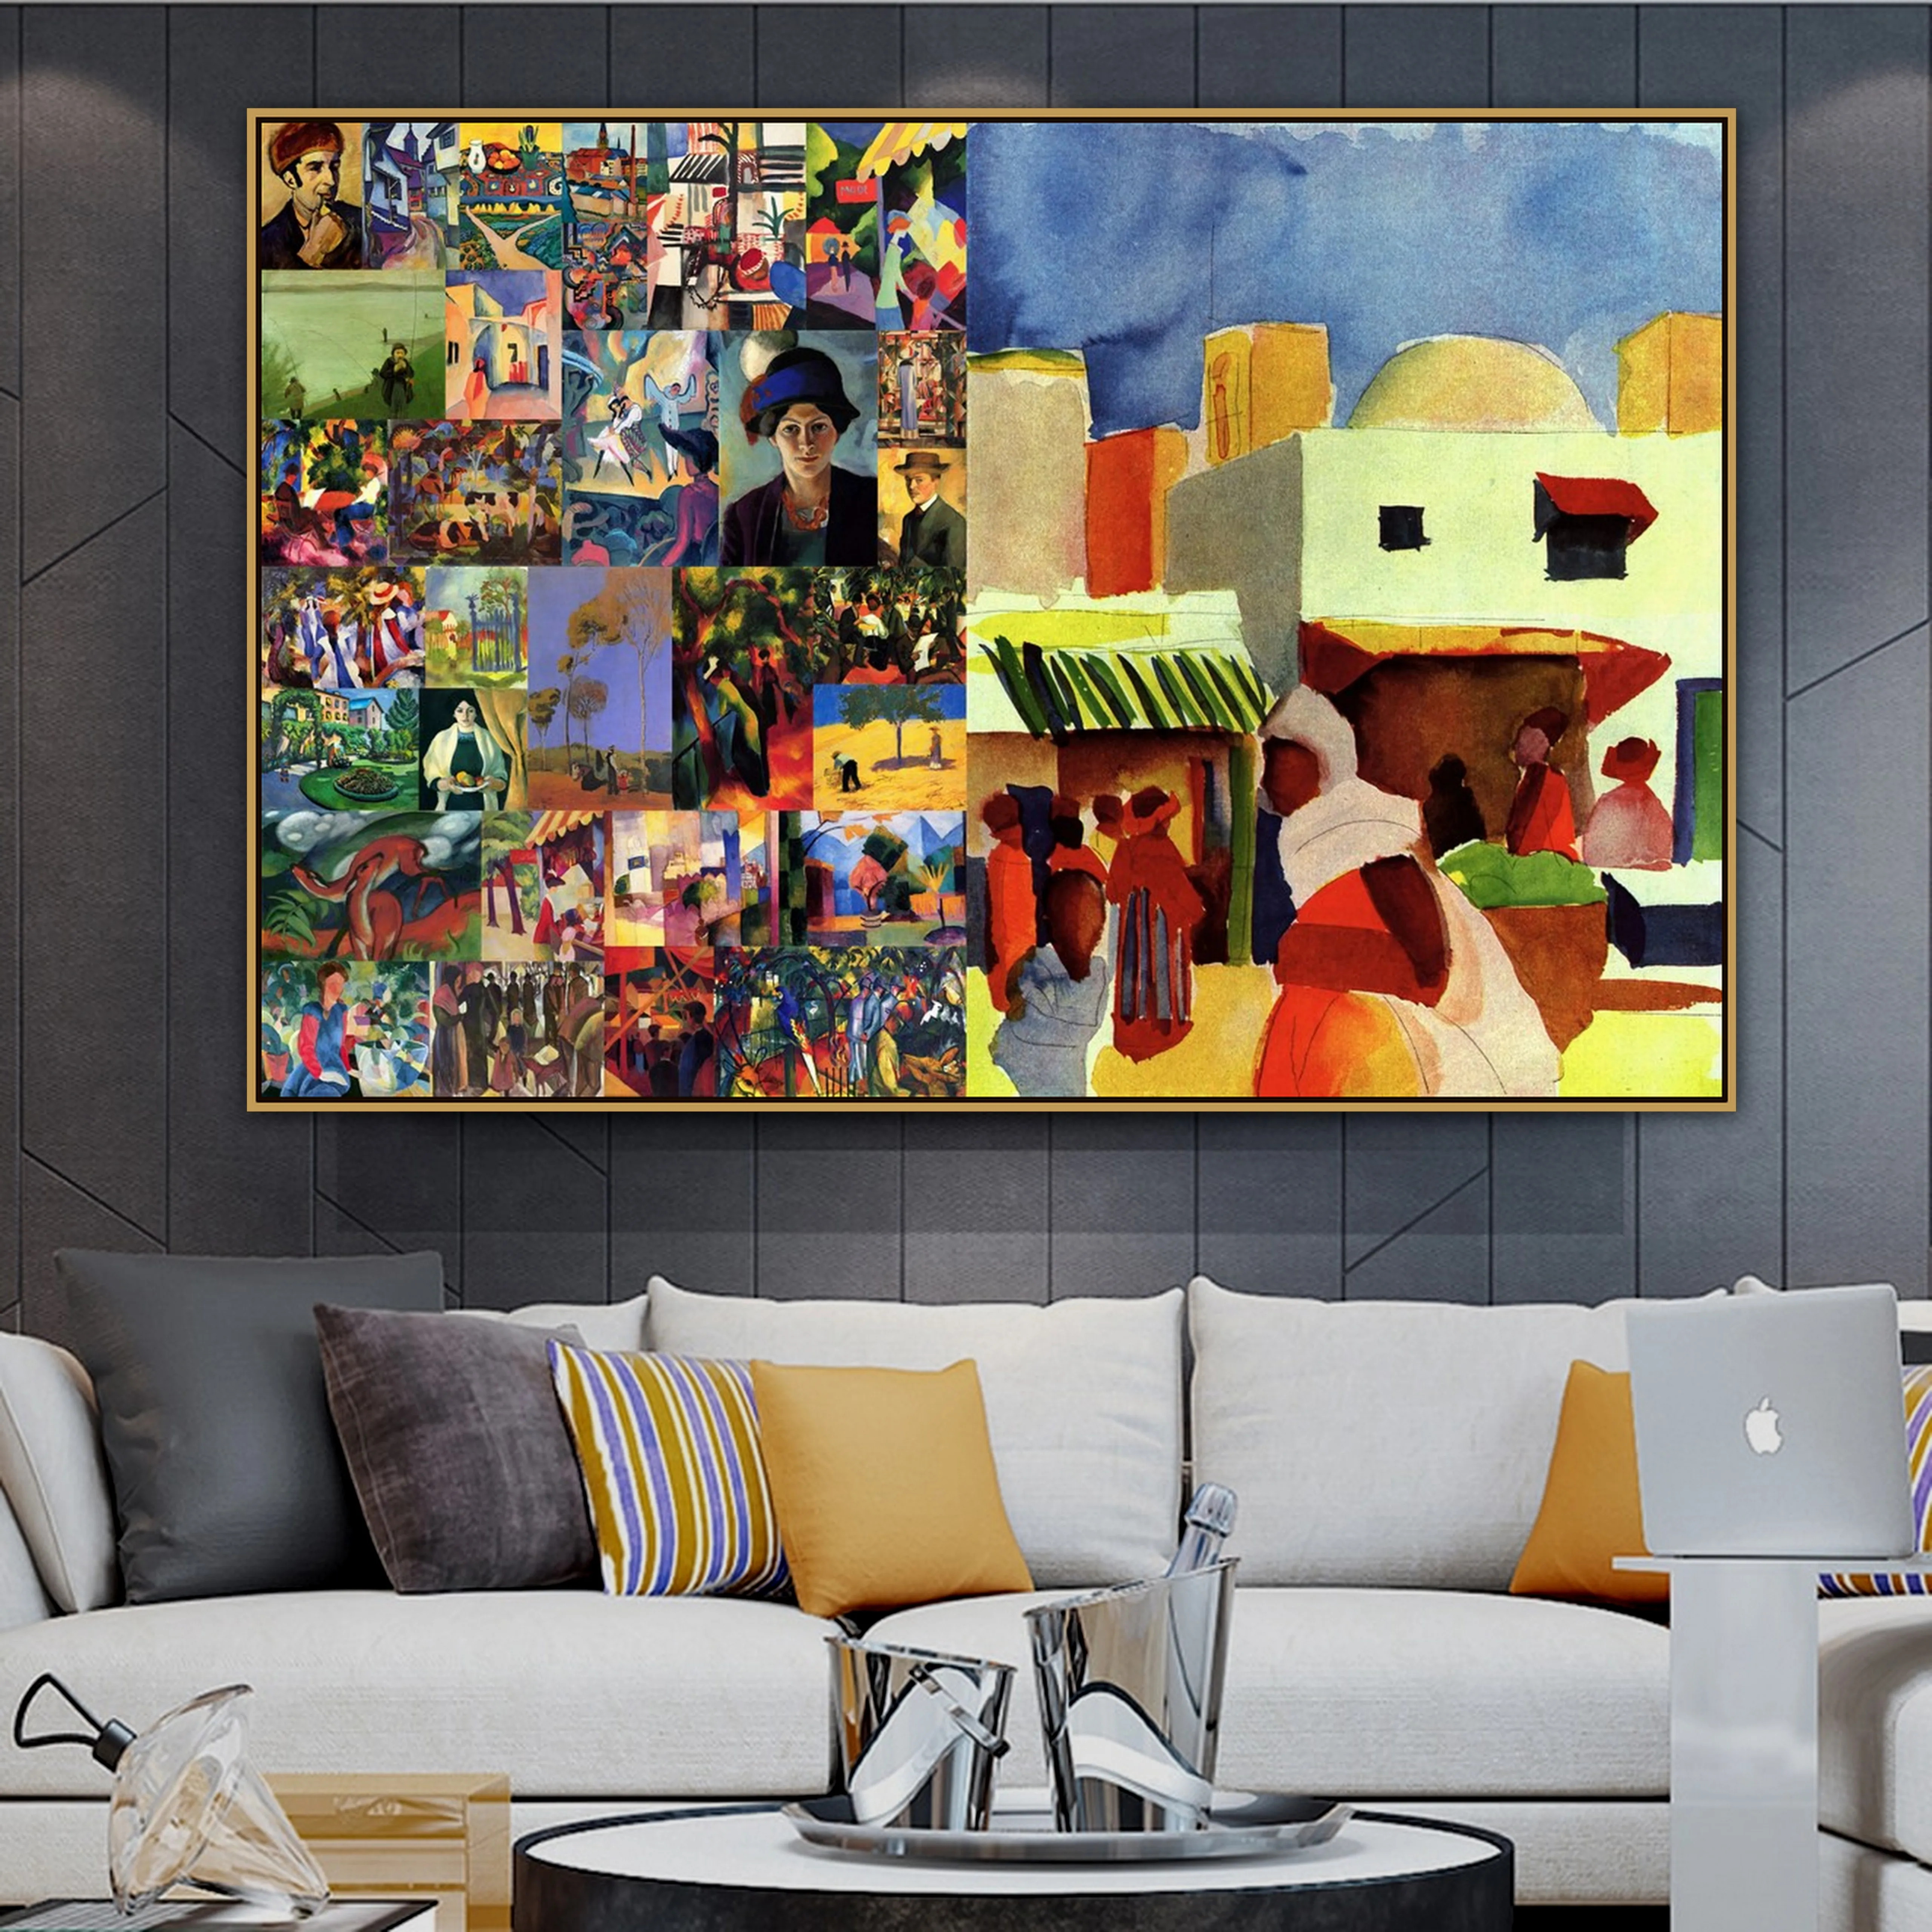 

August Macke Old Famous Master Artist Garden Picture Painting Picture Collage Print for Room Hanging Decoration Wall Artwork